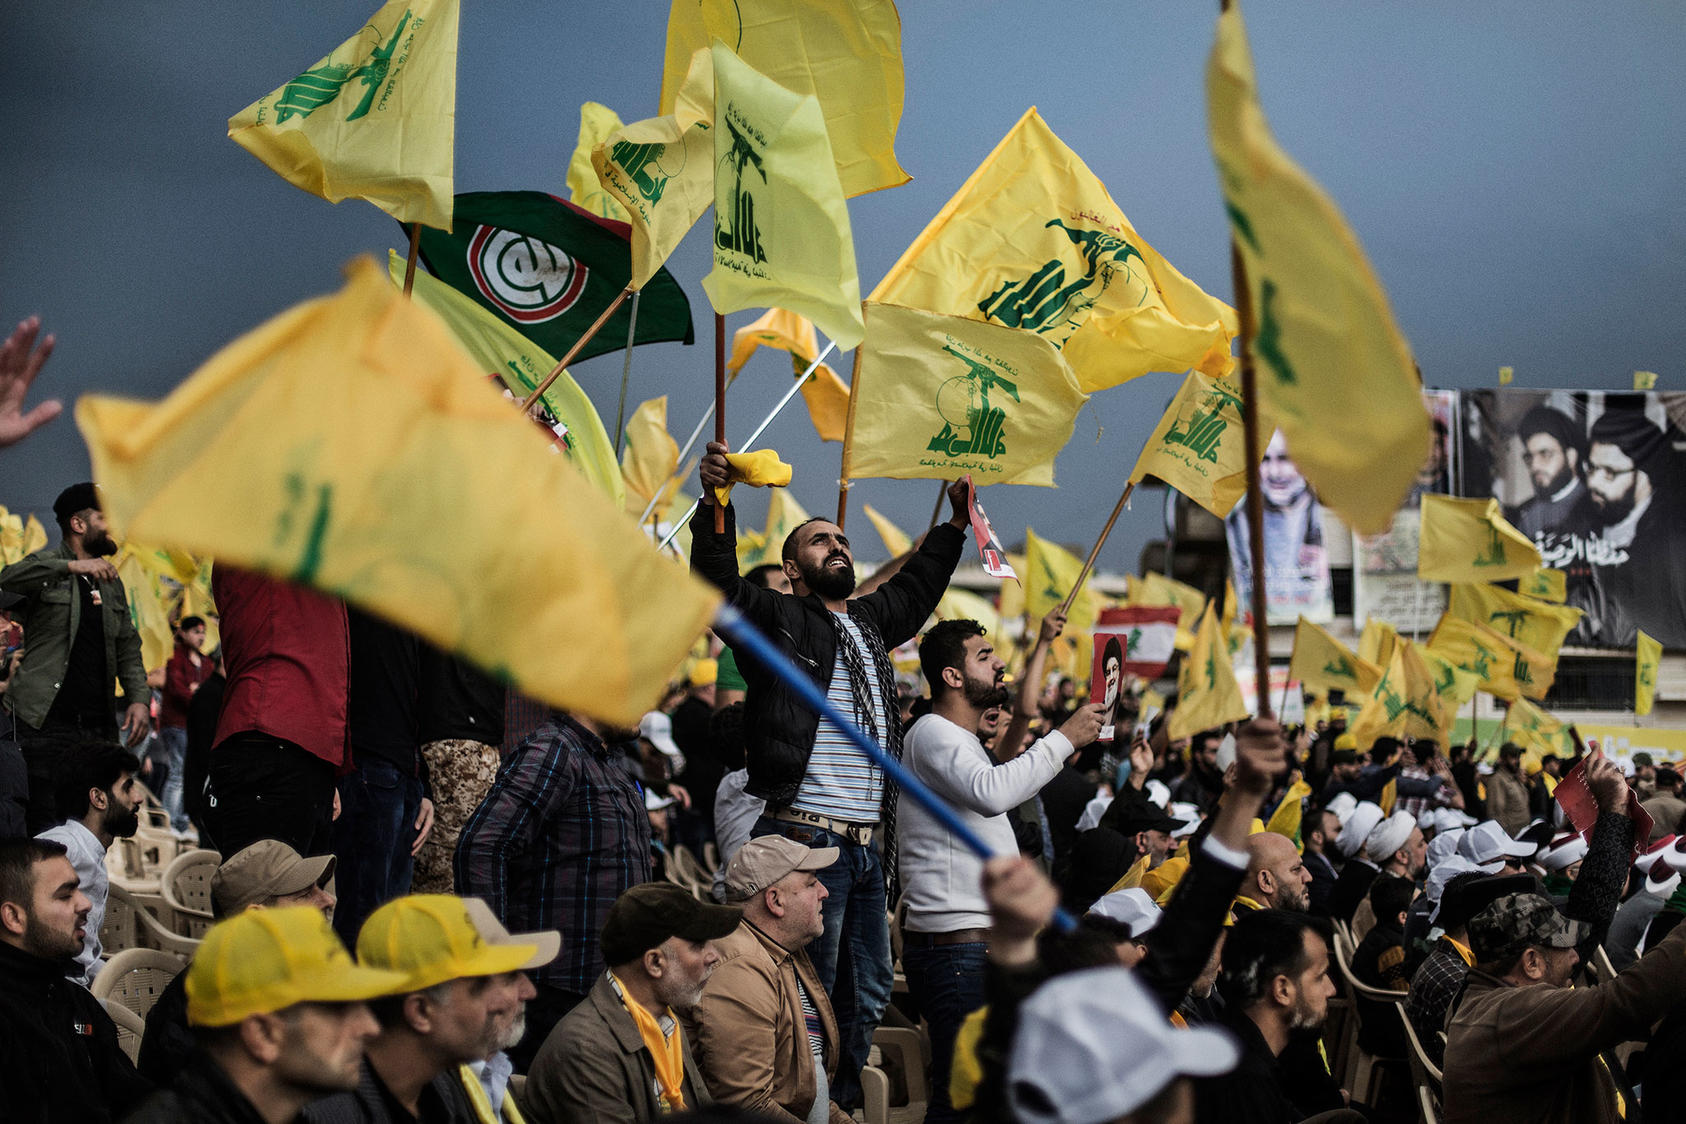 Hezbollah supporters at a rally ahead of Lebanon's 2018 parliamentary elections (Diego Ibarra Sanchez/The New York Times) 